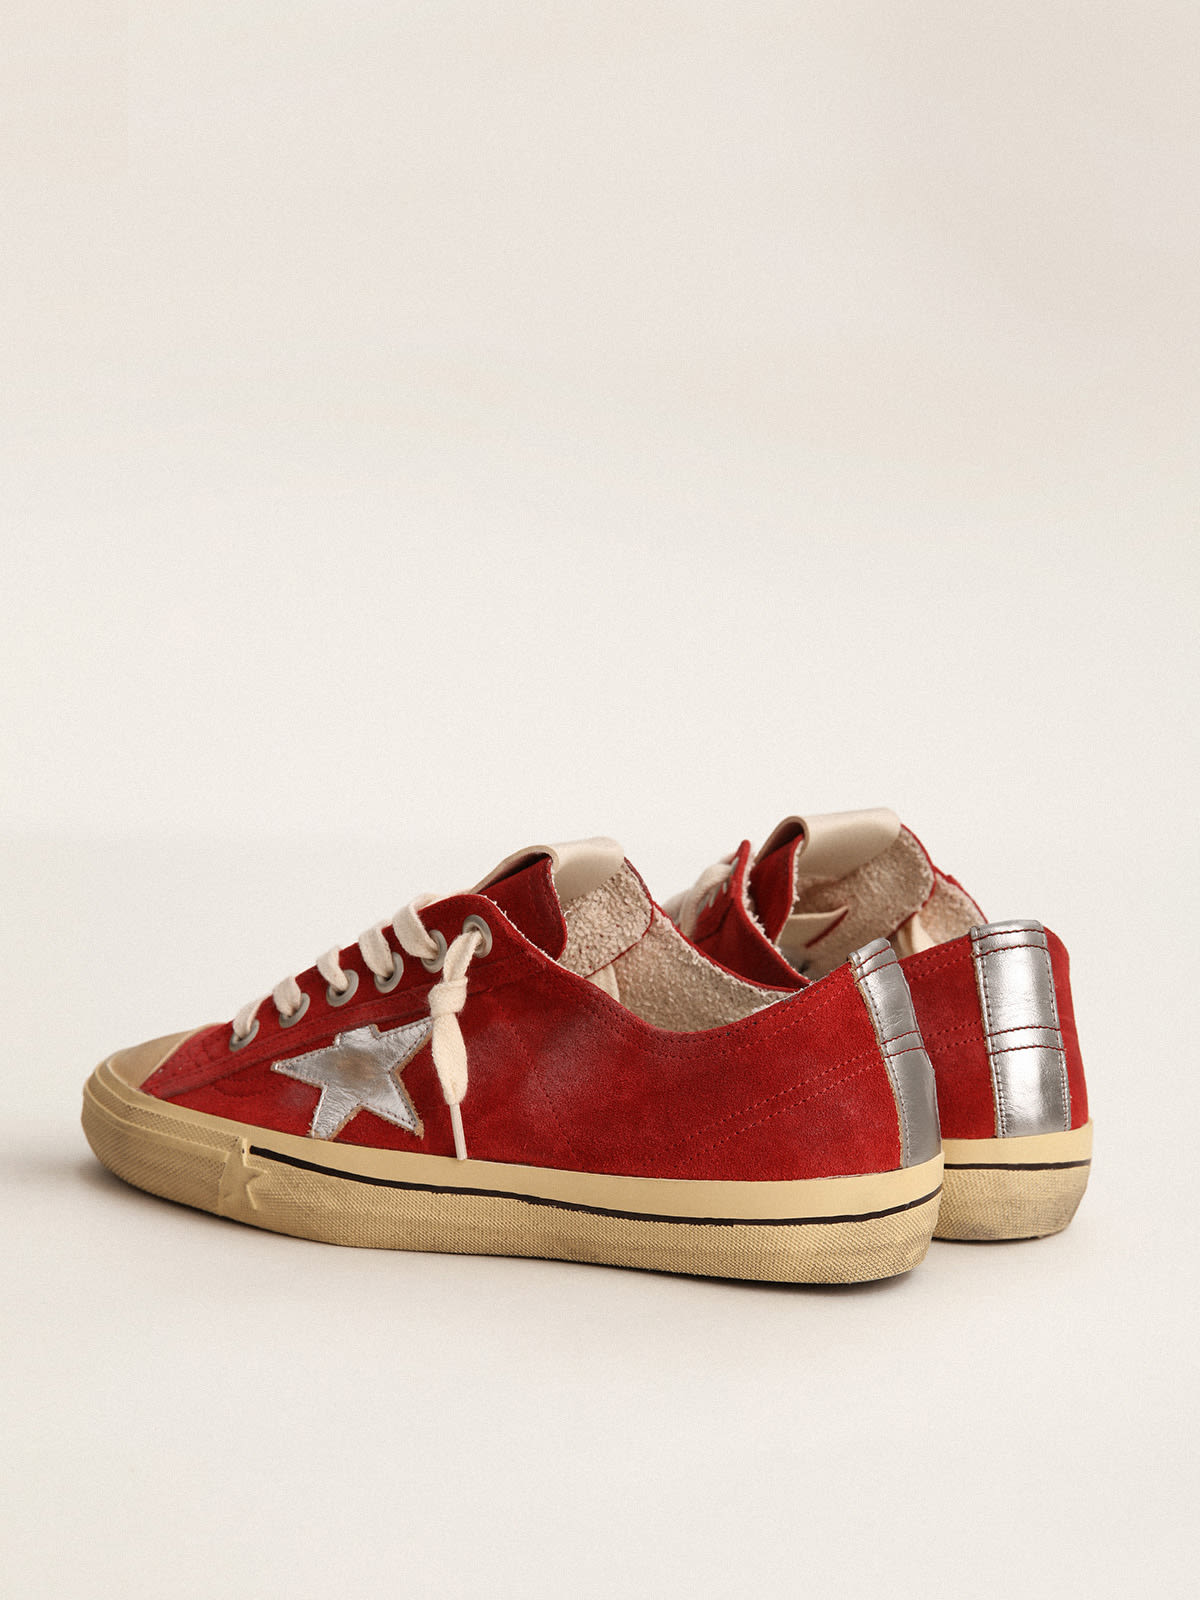 Golden Goose - V-Star LTD sneakers in dark red suede with silver metallic leather star and heel tab in 